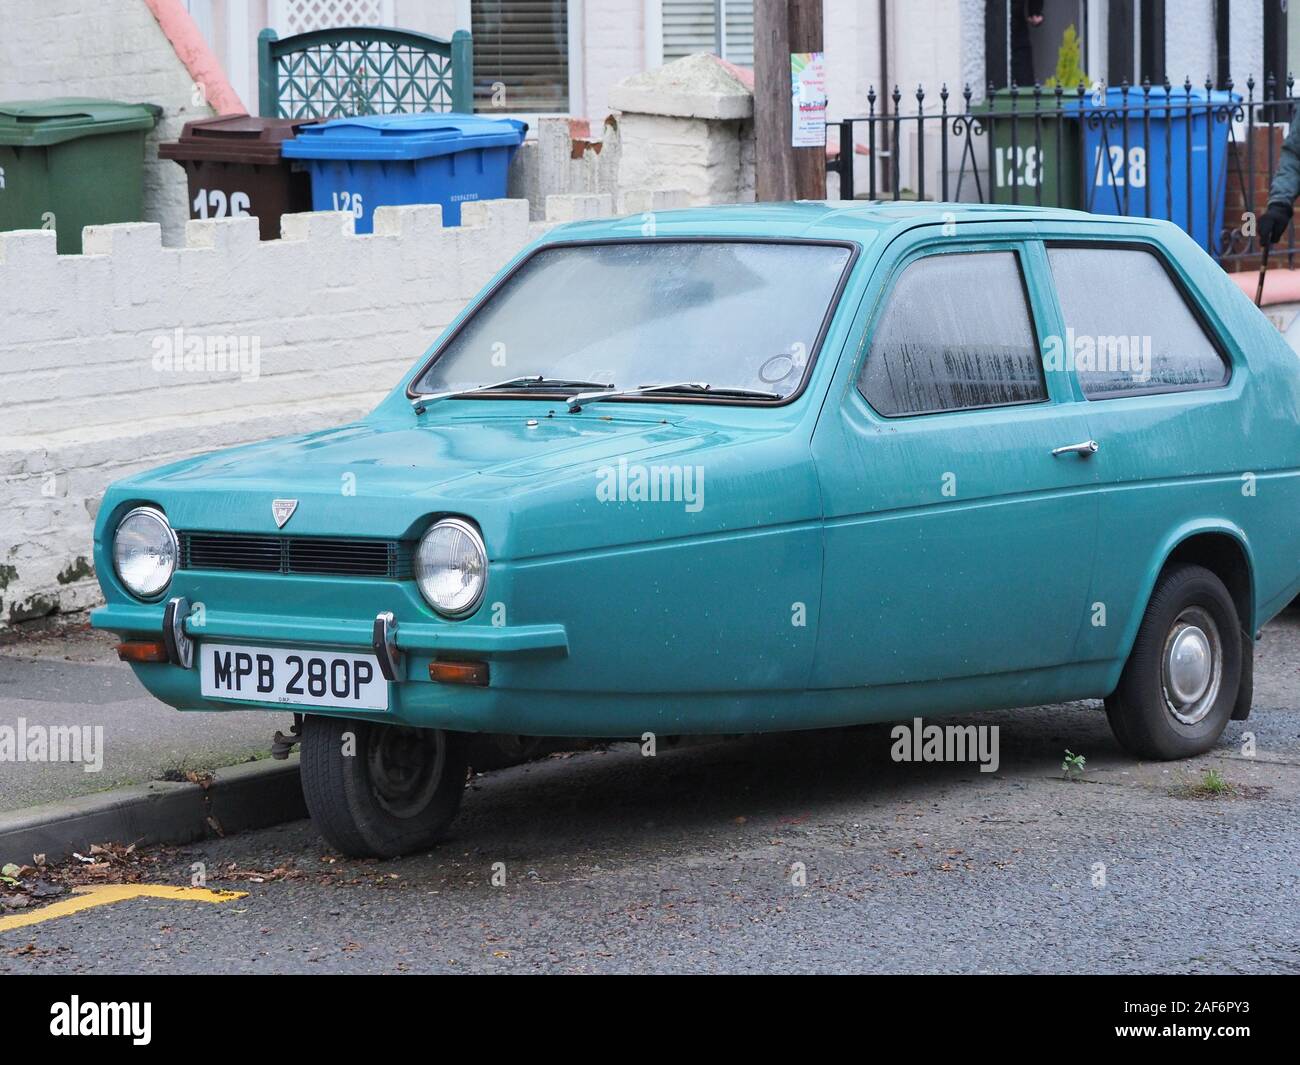 A front and side view of a Reliant Robin small three-wheeled car. Stock Photo